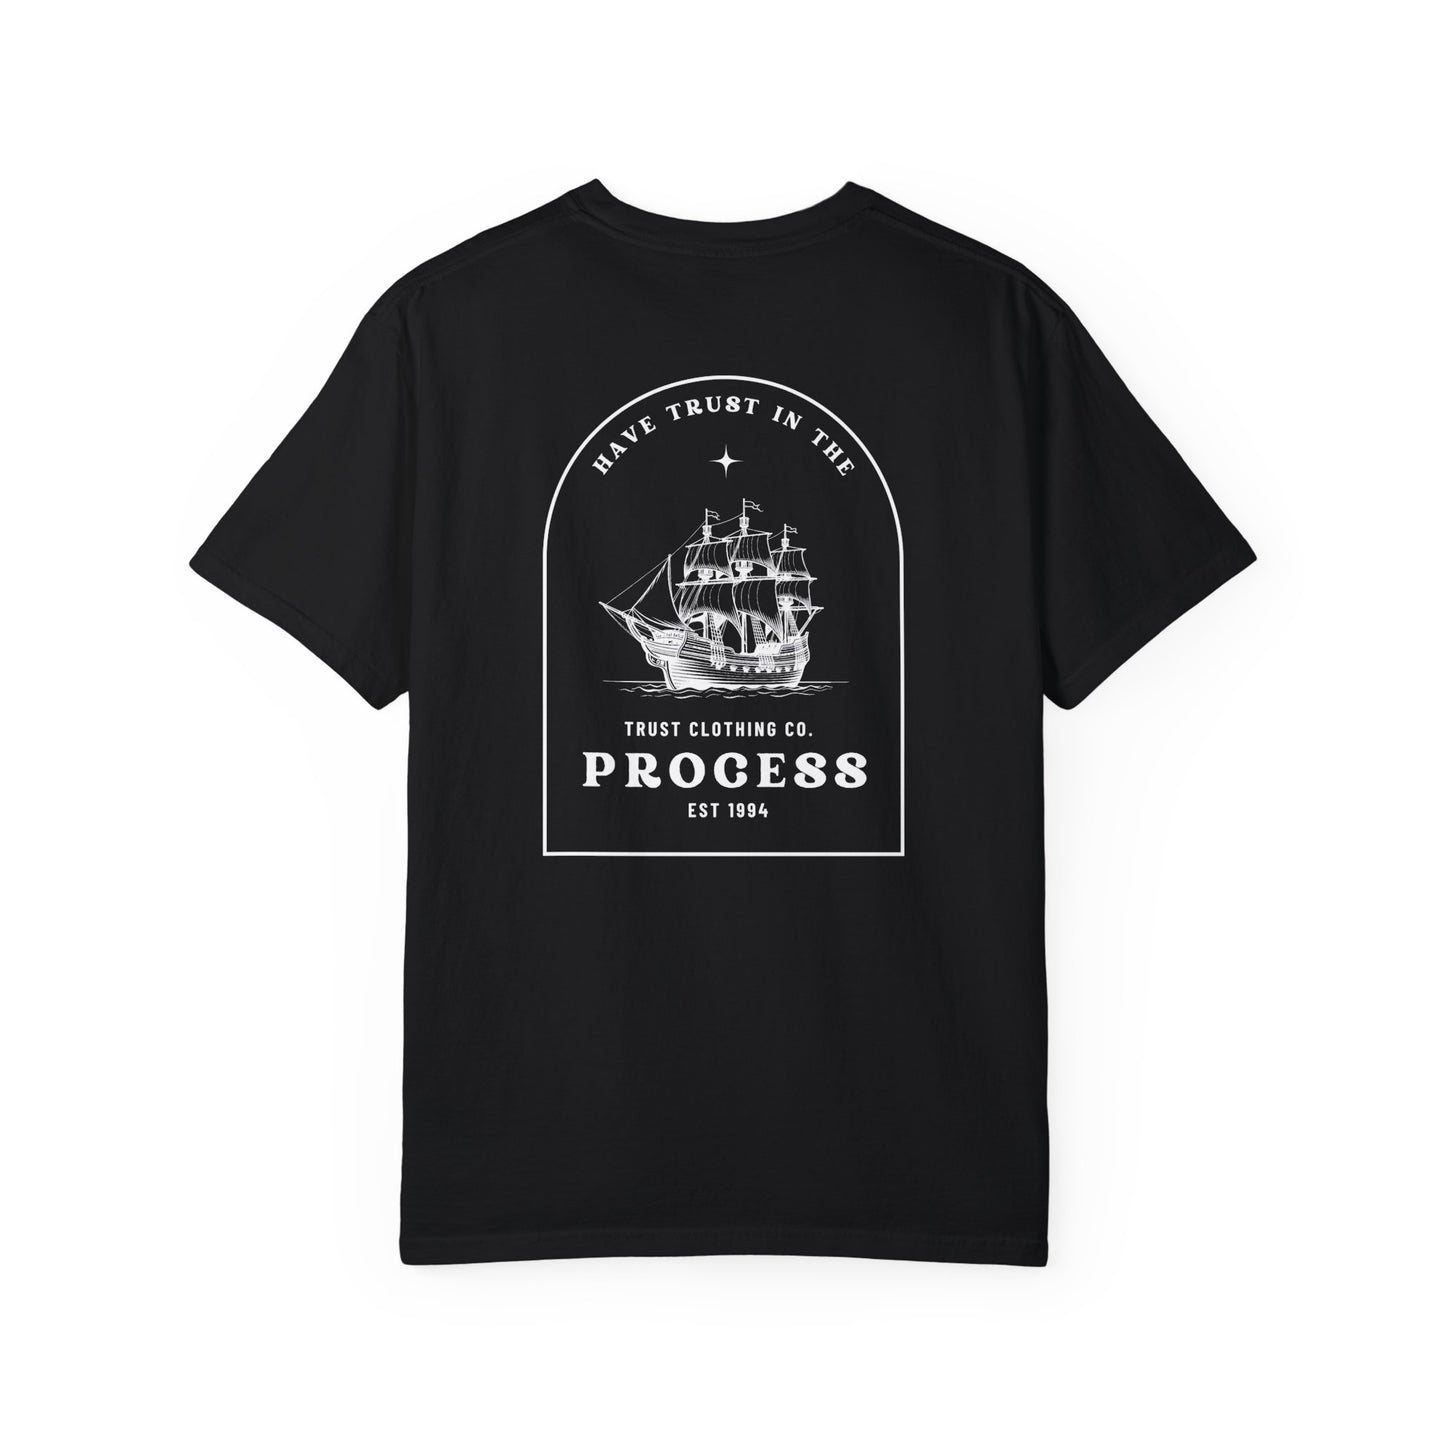 Trust Clothing Co / Process